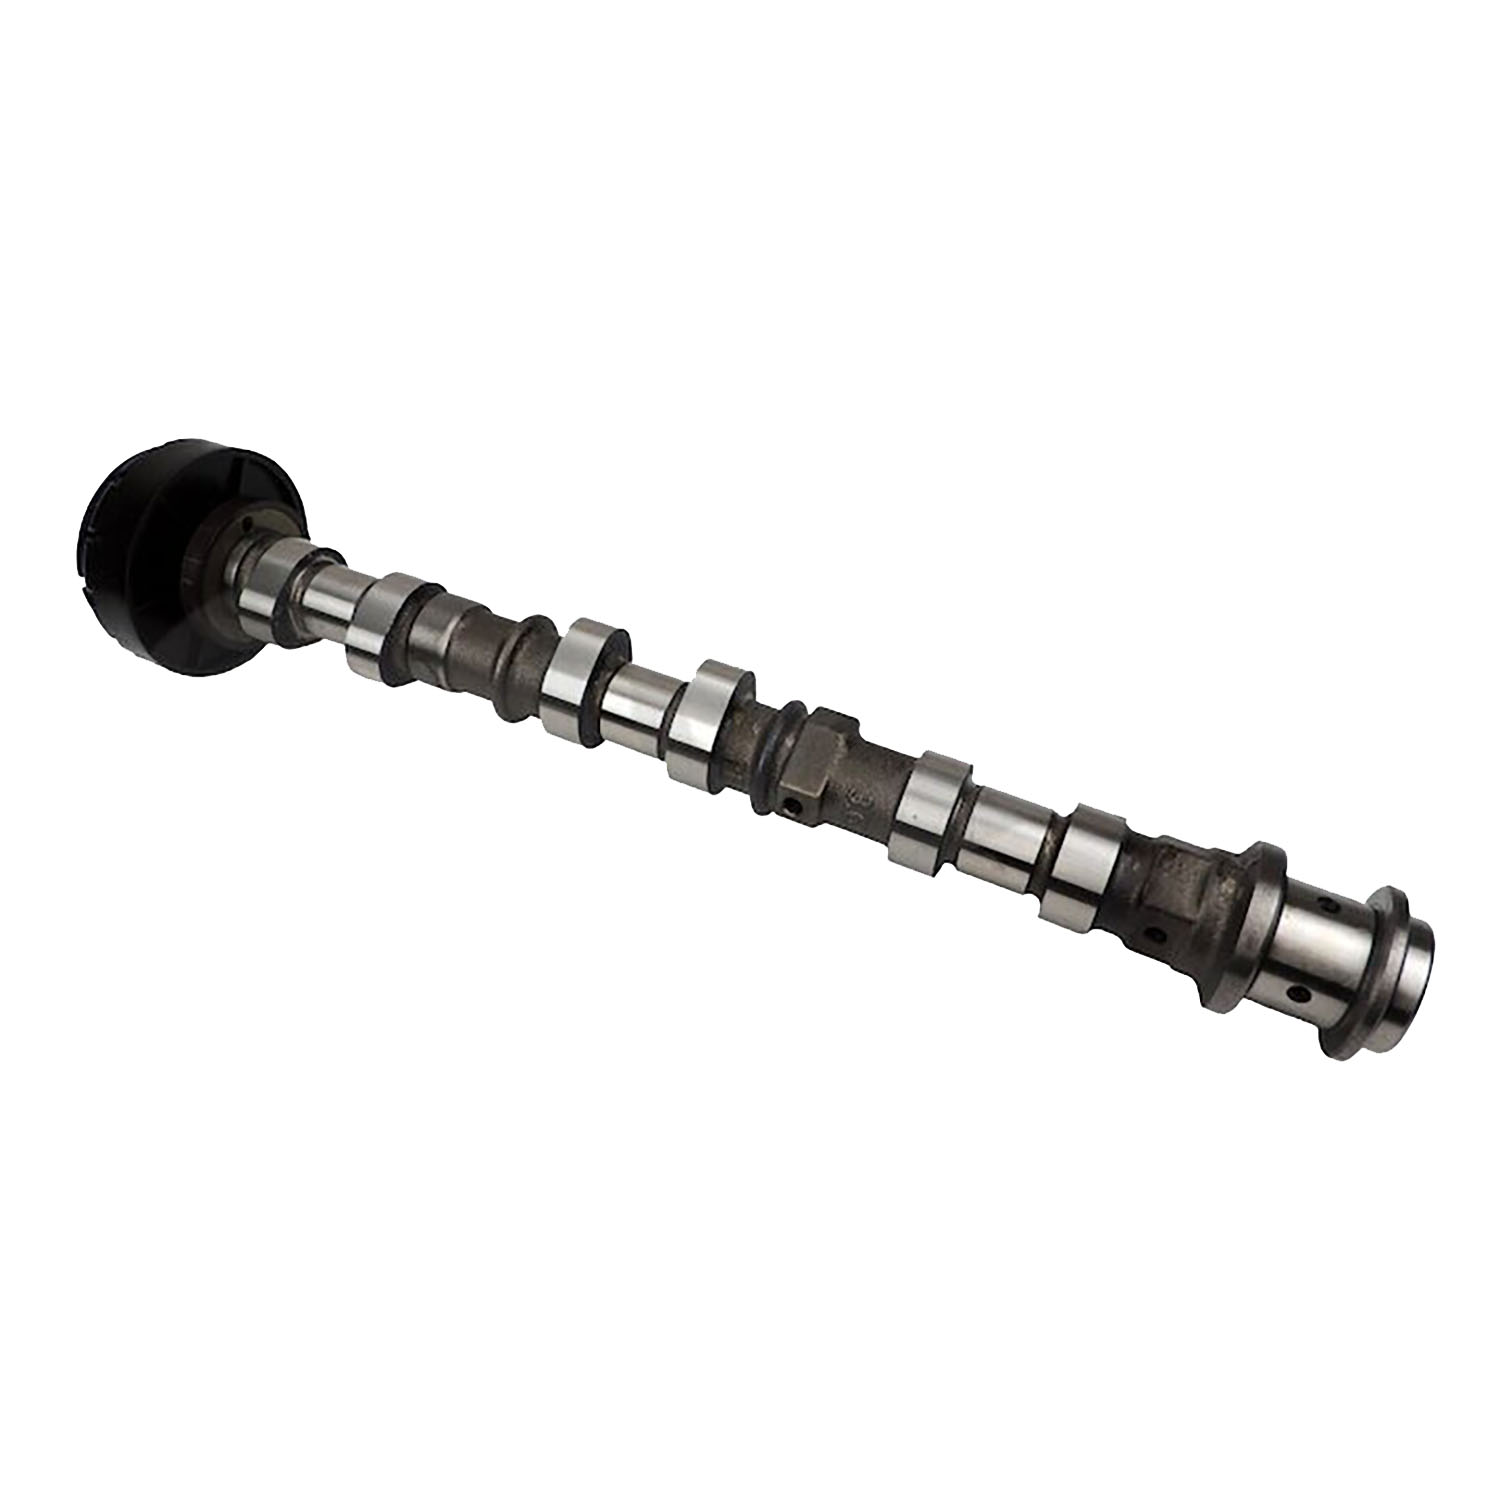 Jeep Wrangler Right Exhaust Camshaft 3.6L Engine